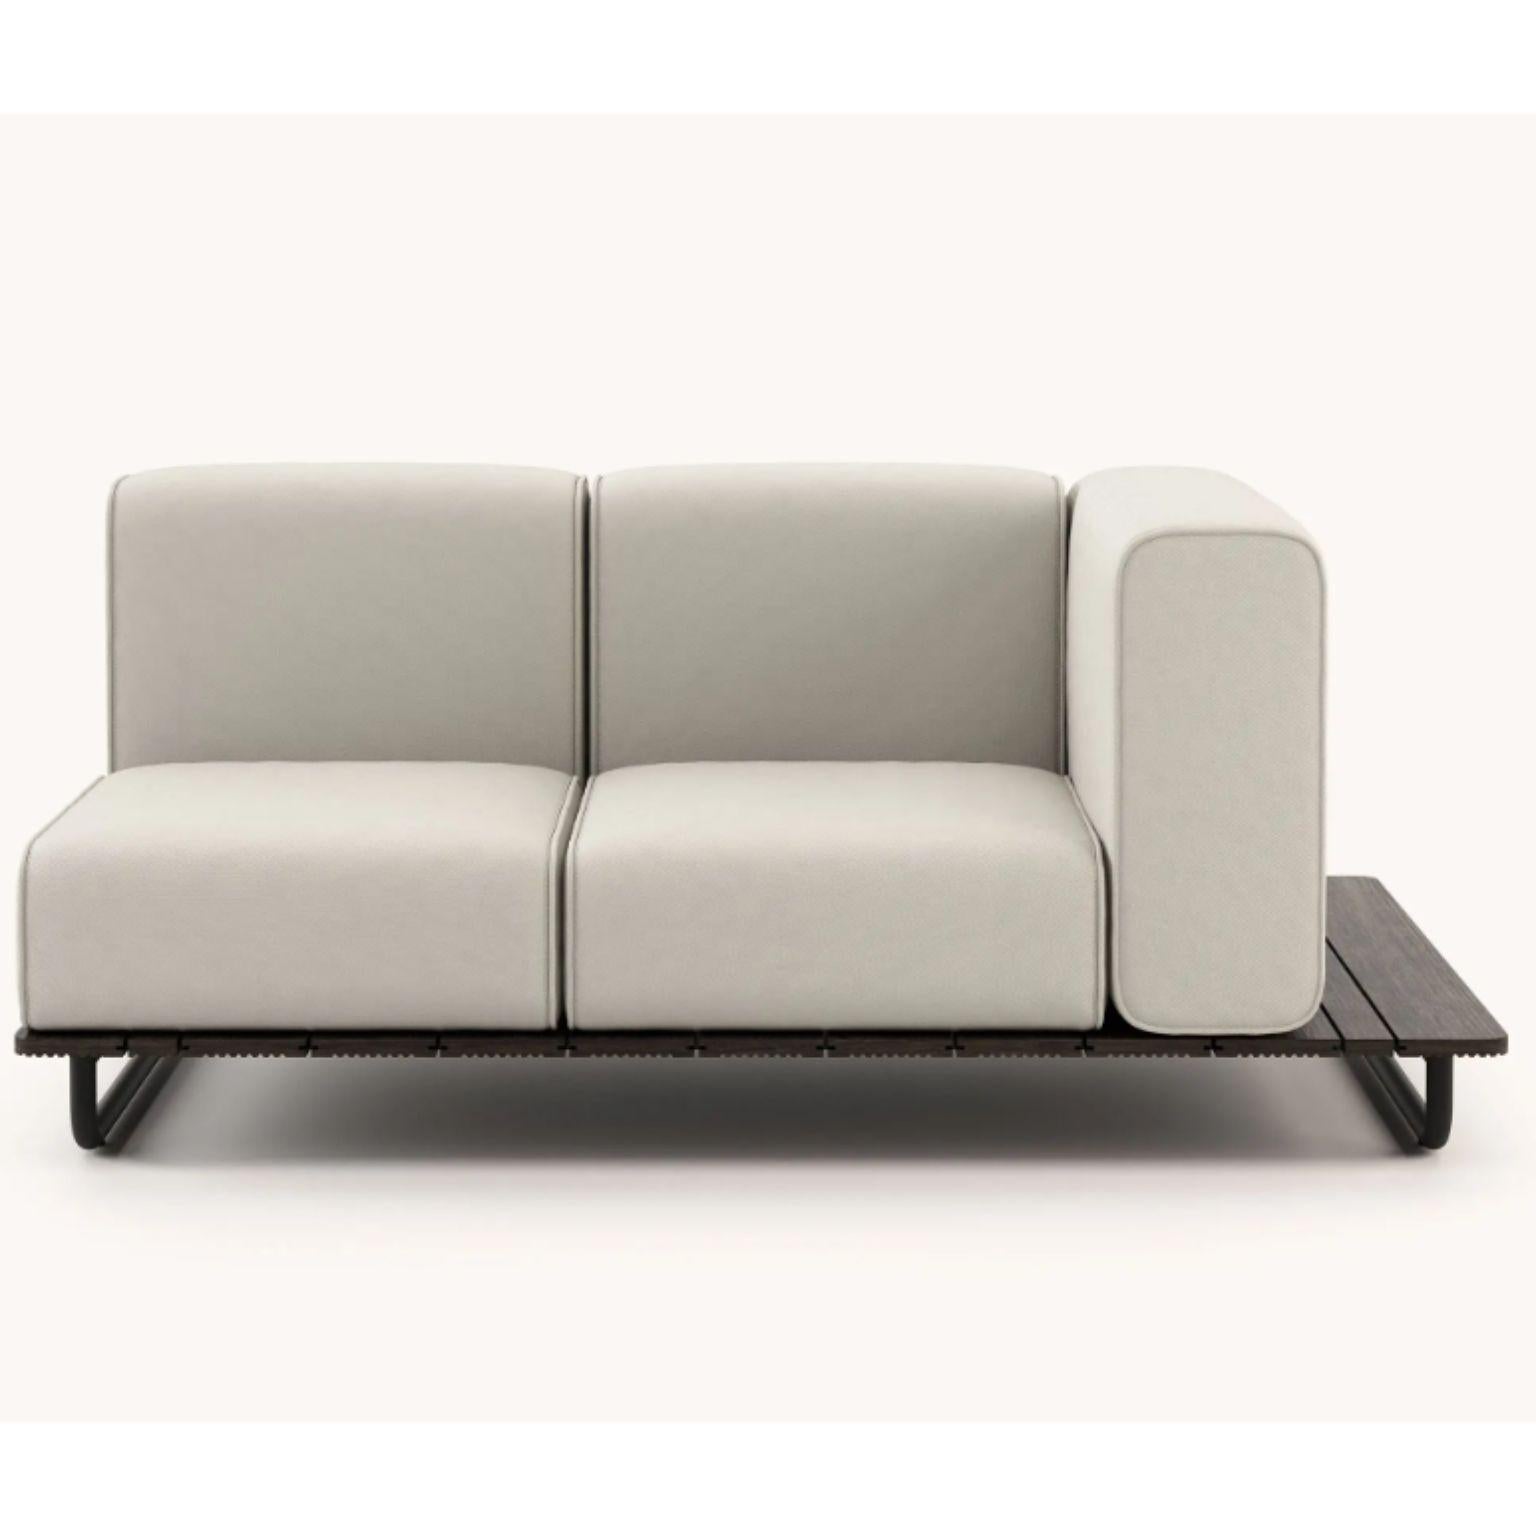 Post-Modern Copacabana Sofa with 1 Arm Left by Domkapa For Sale